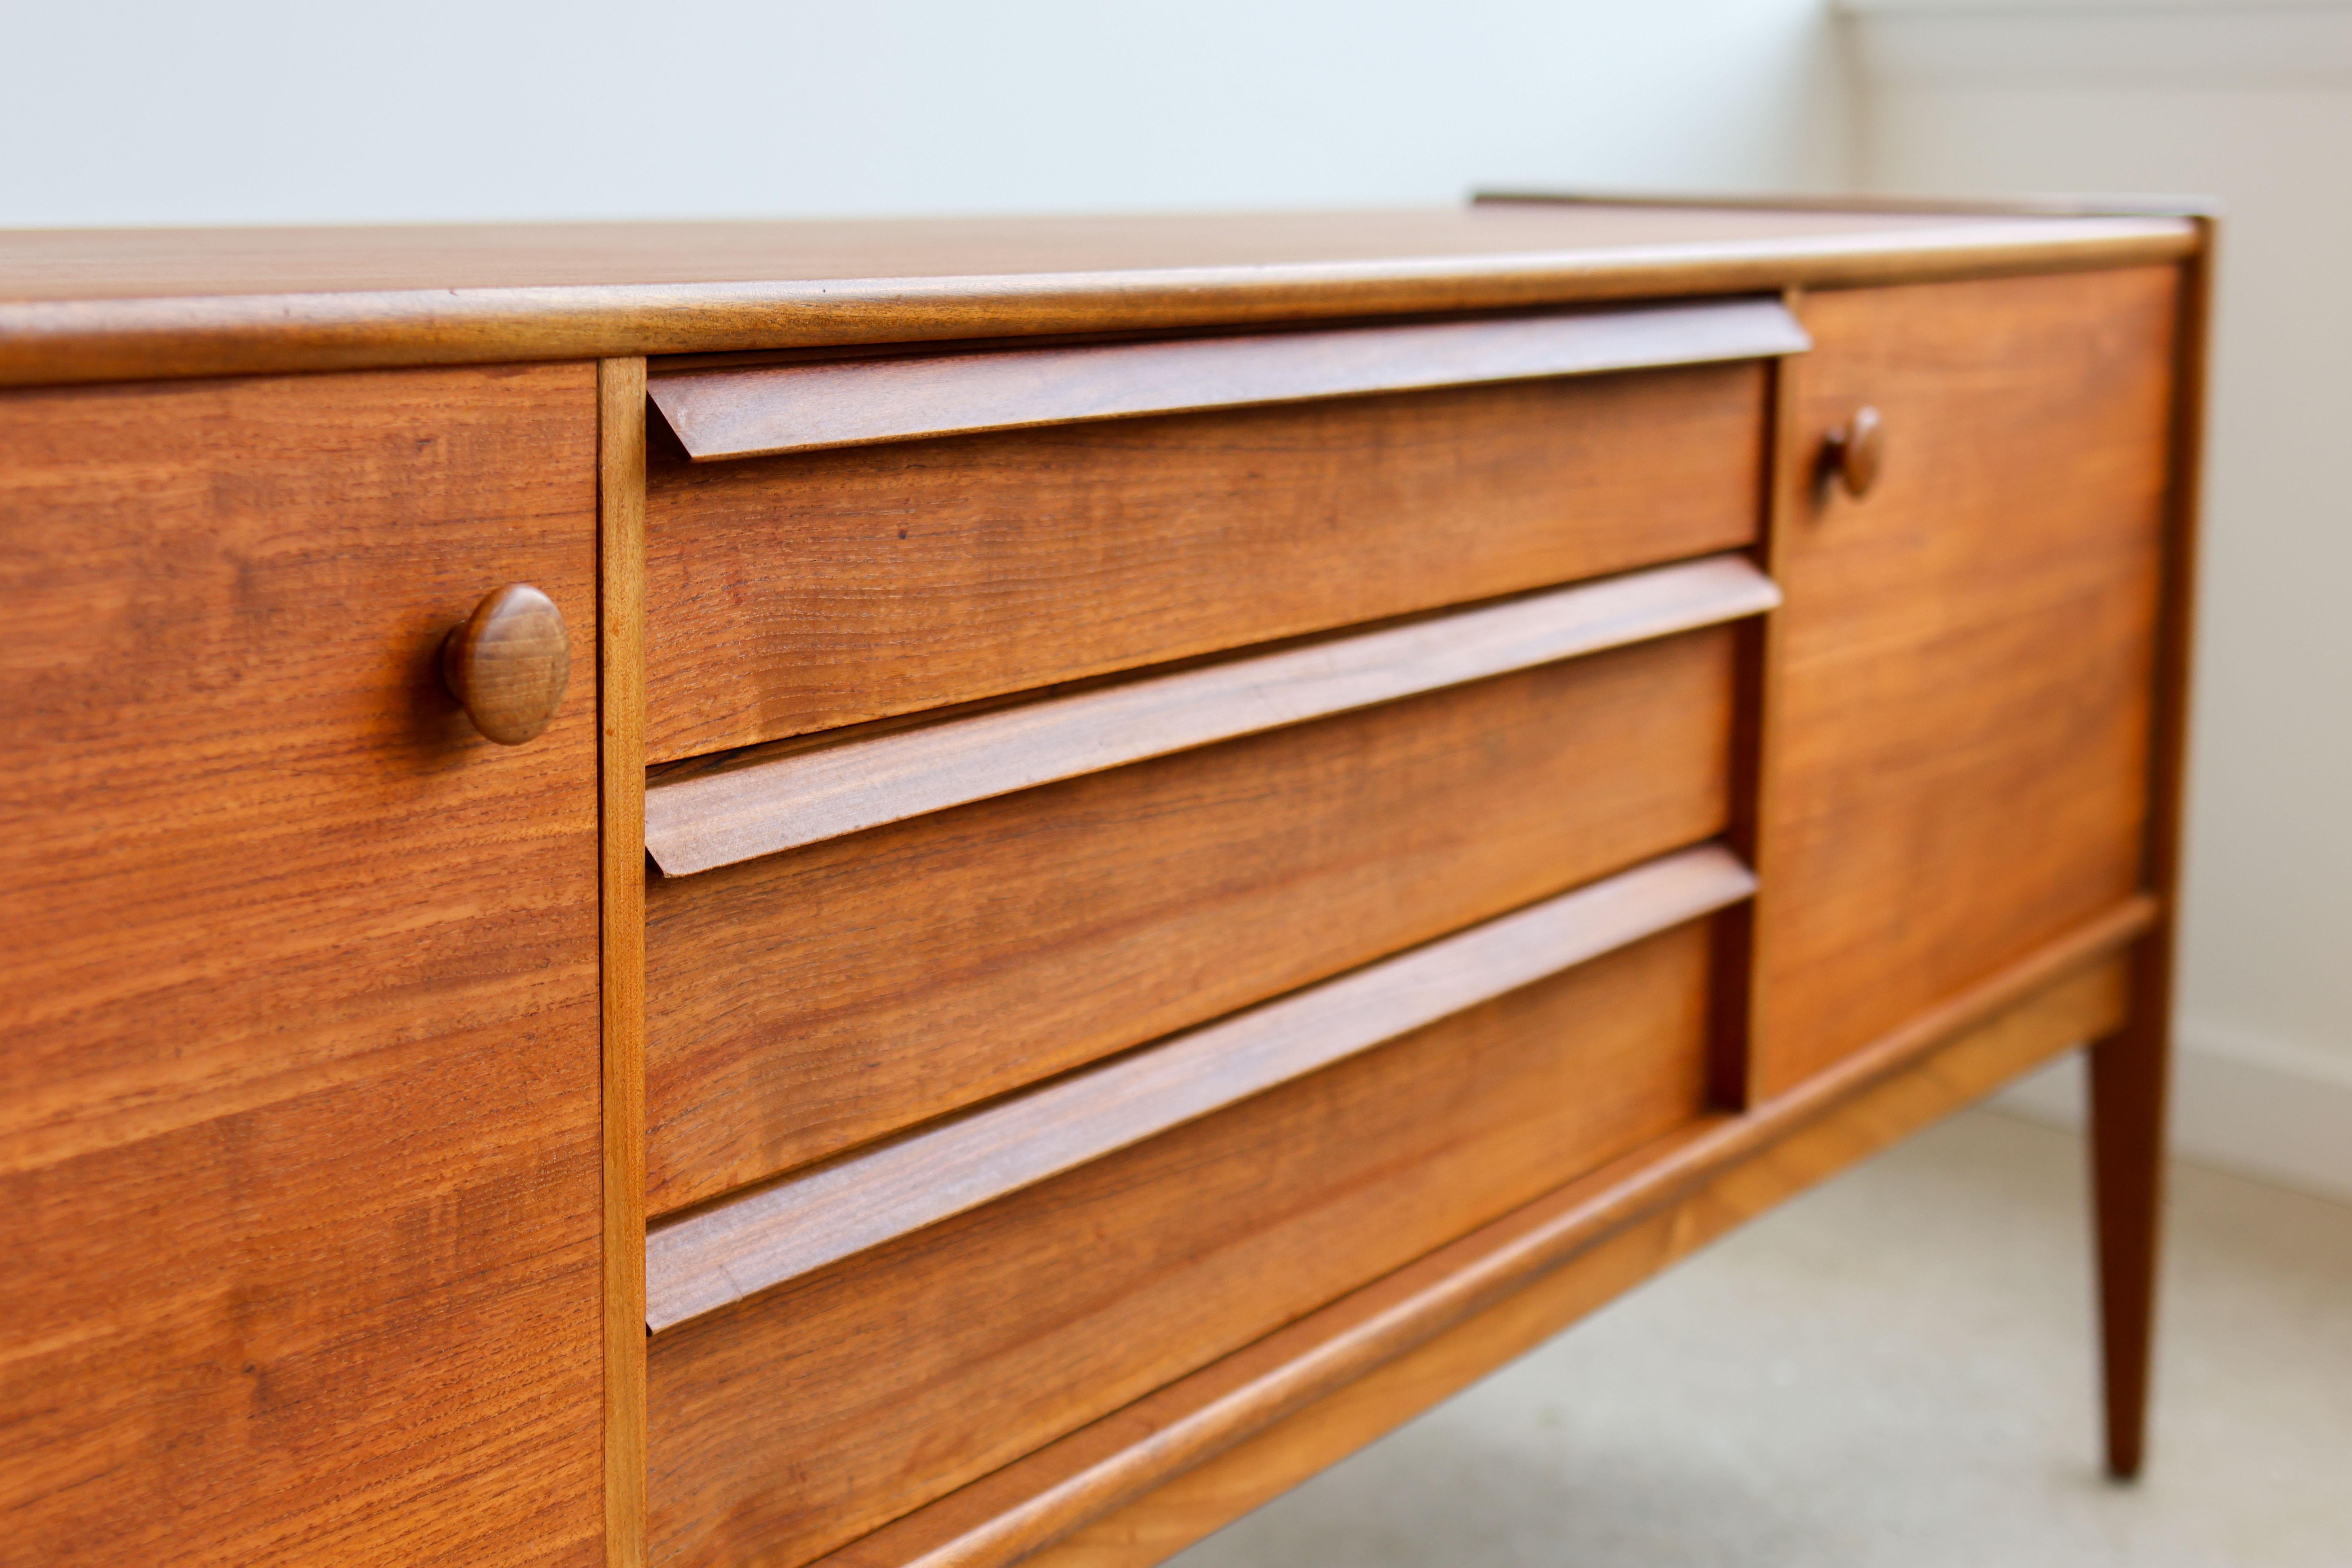 Mid-Century Modern teakwood credenza. 
Made by Younger Furniture Co, Ltd. 
Two cabinets:  1 with capabilities to hold records, 1 with built-in shelf.
Three dovetailed drawers; top drawer holds dividers.
Rarely seen finished back.
Excellent vintage